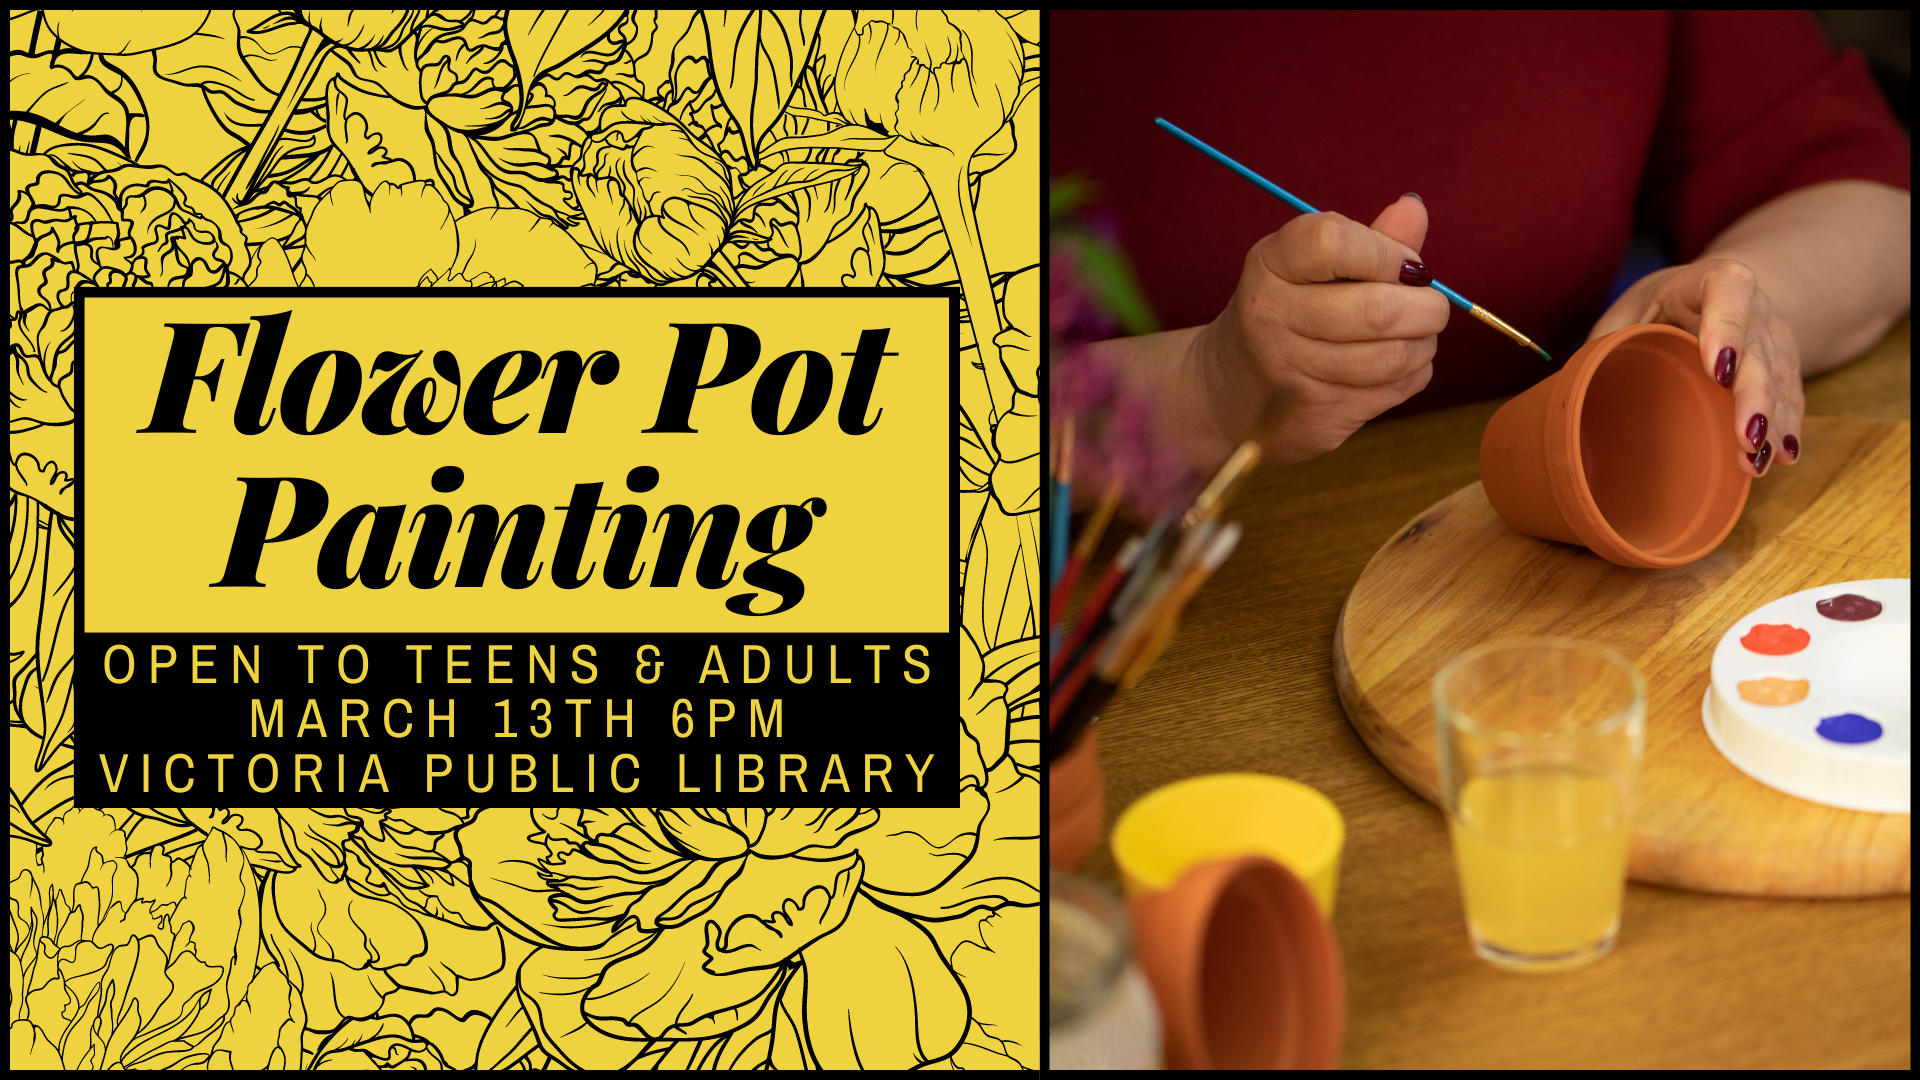 Flower pot painting, March 13th at 6pm, open to teens and adults